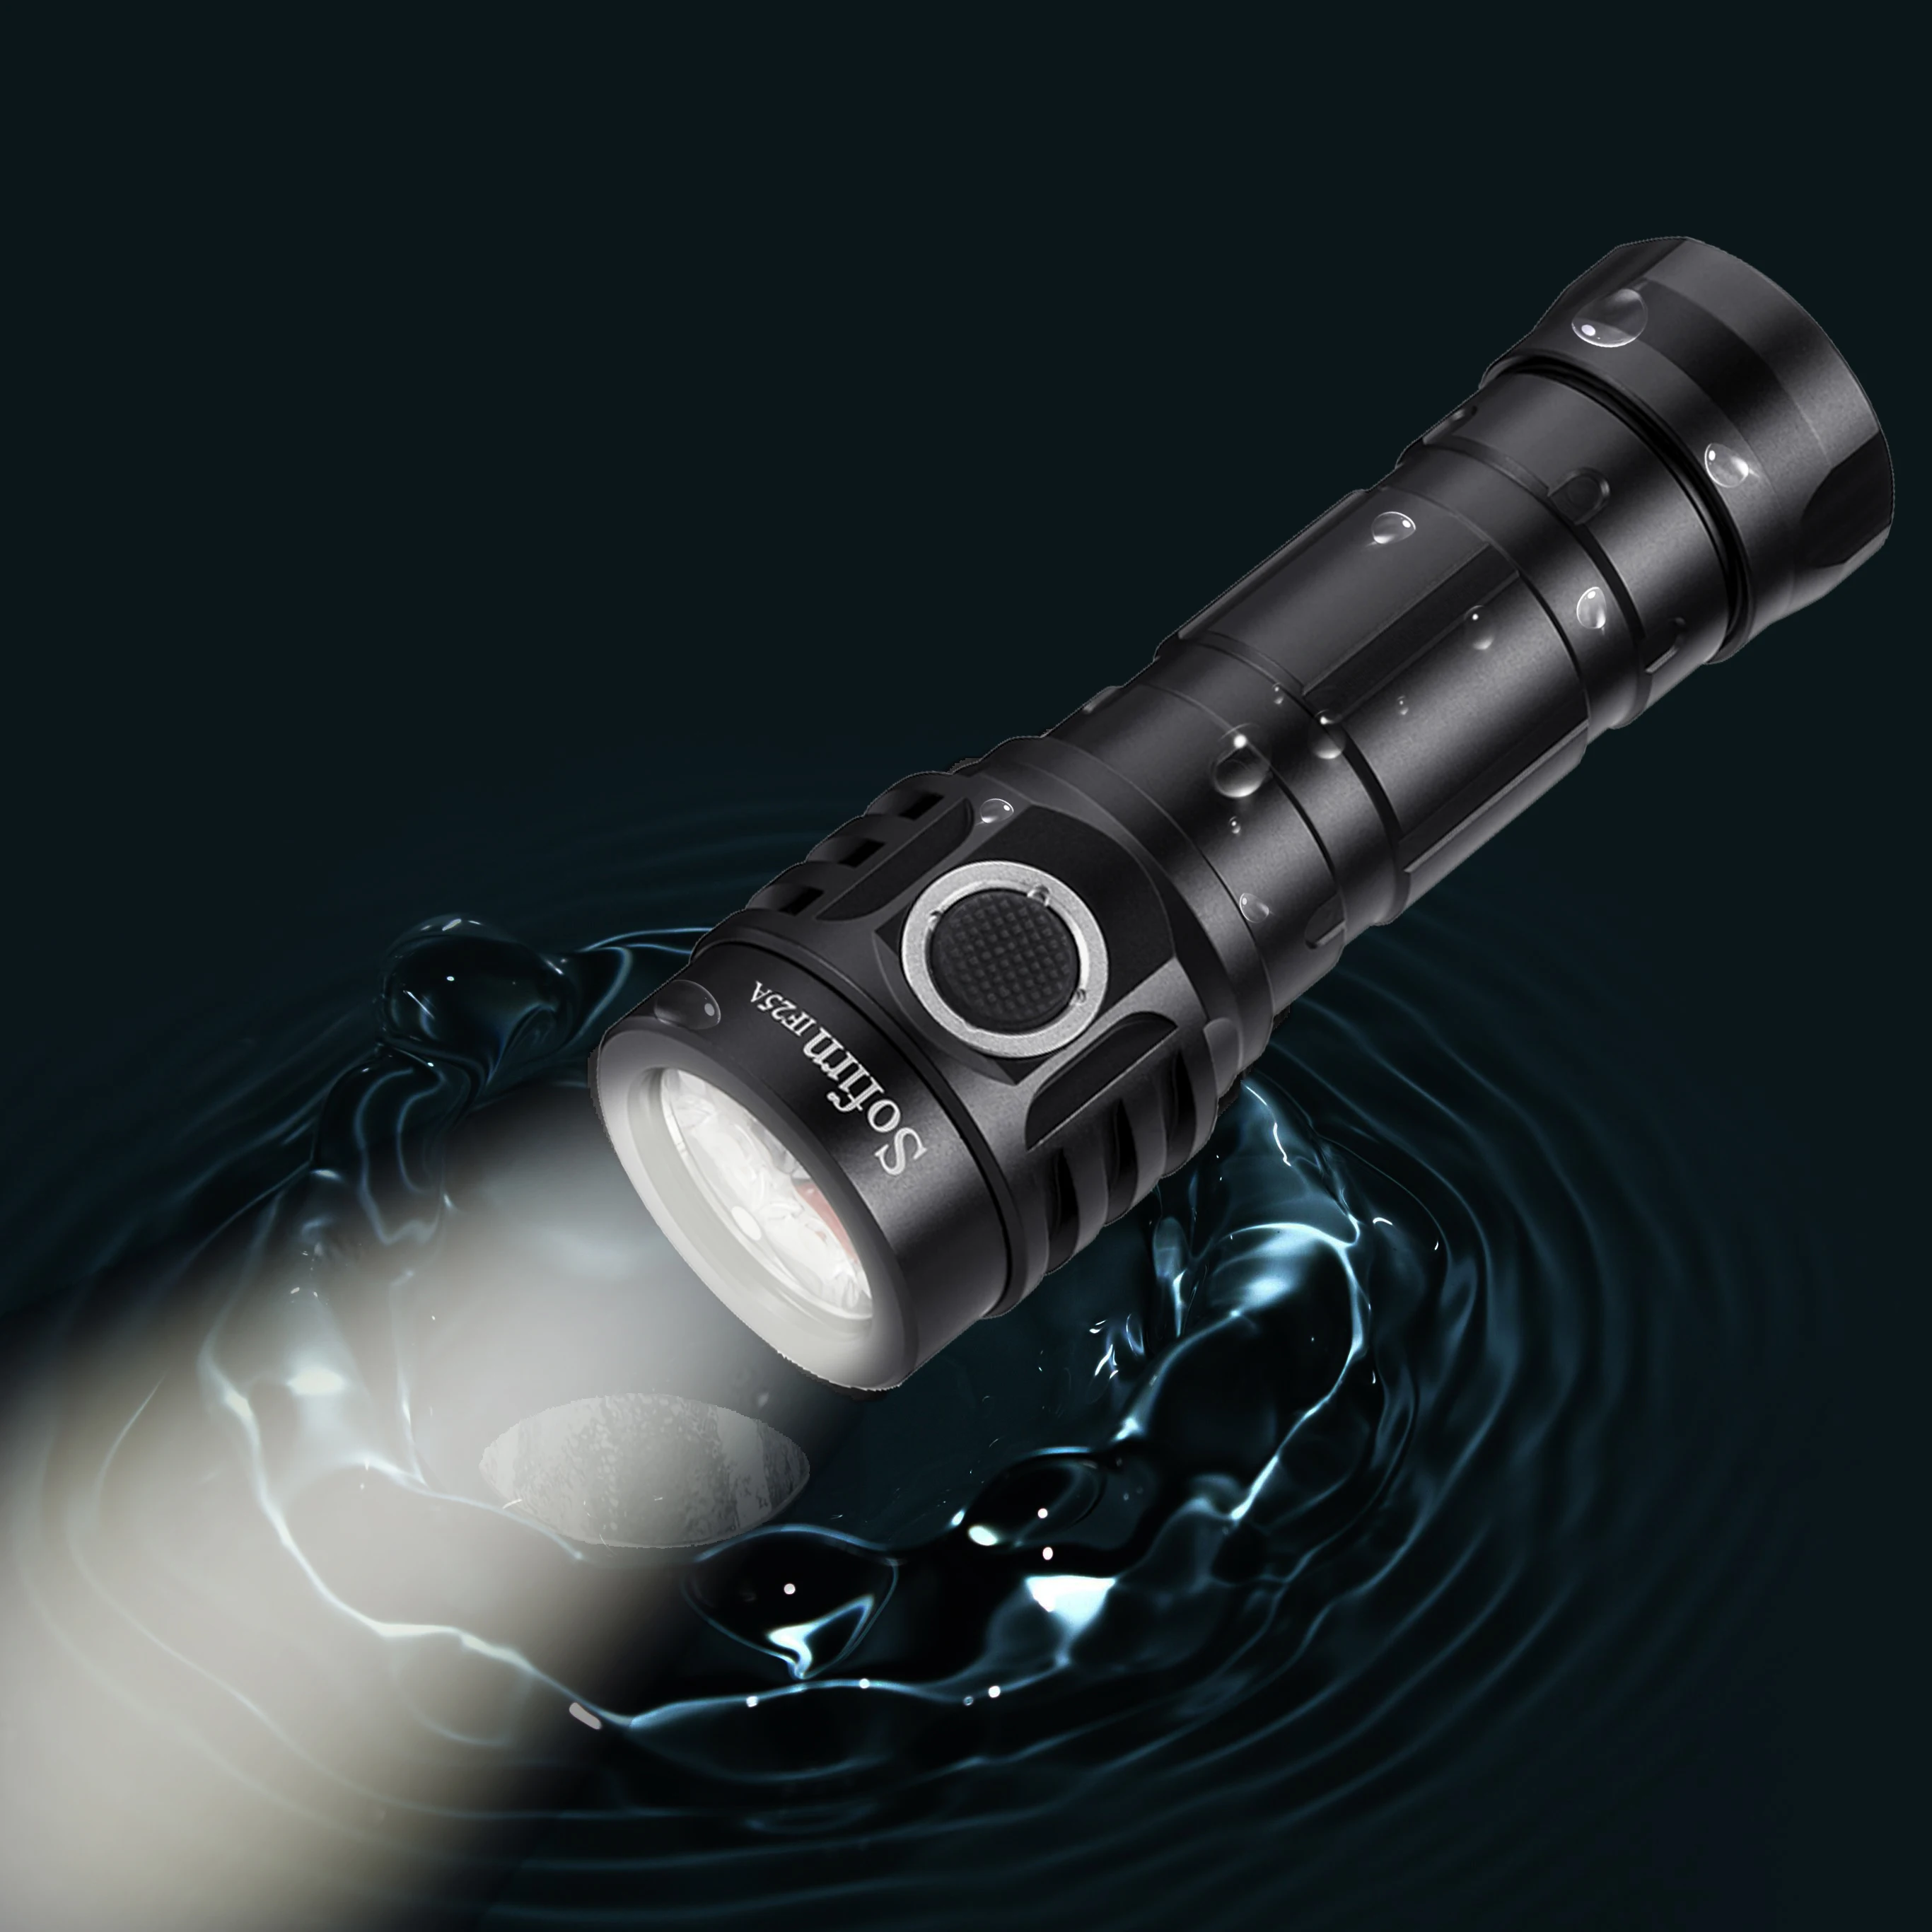 

If25a Blf Anduril 4000lm Torch Powerful 21700 Usb Rechargeable Led Flashlights Lantern 4*Sst20 Led Lamp Flashlight